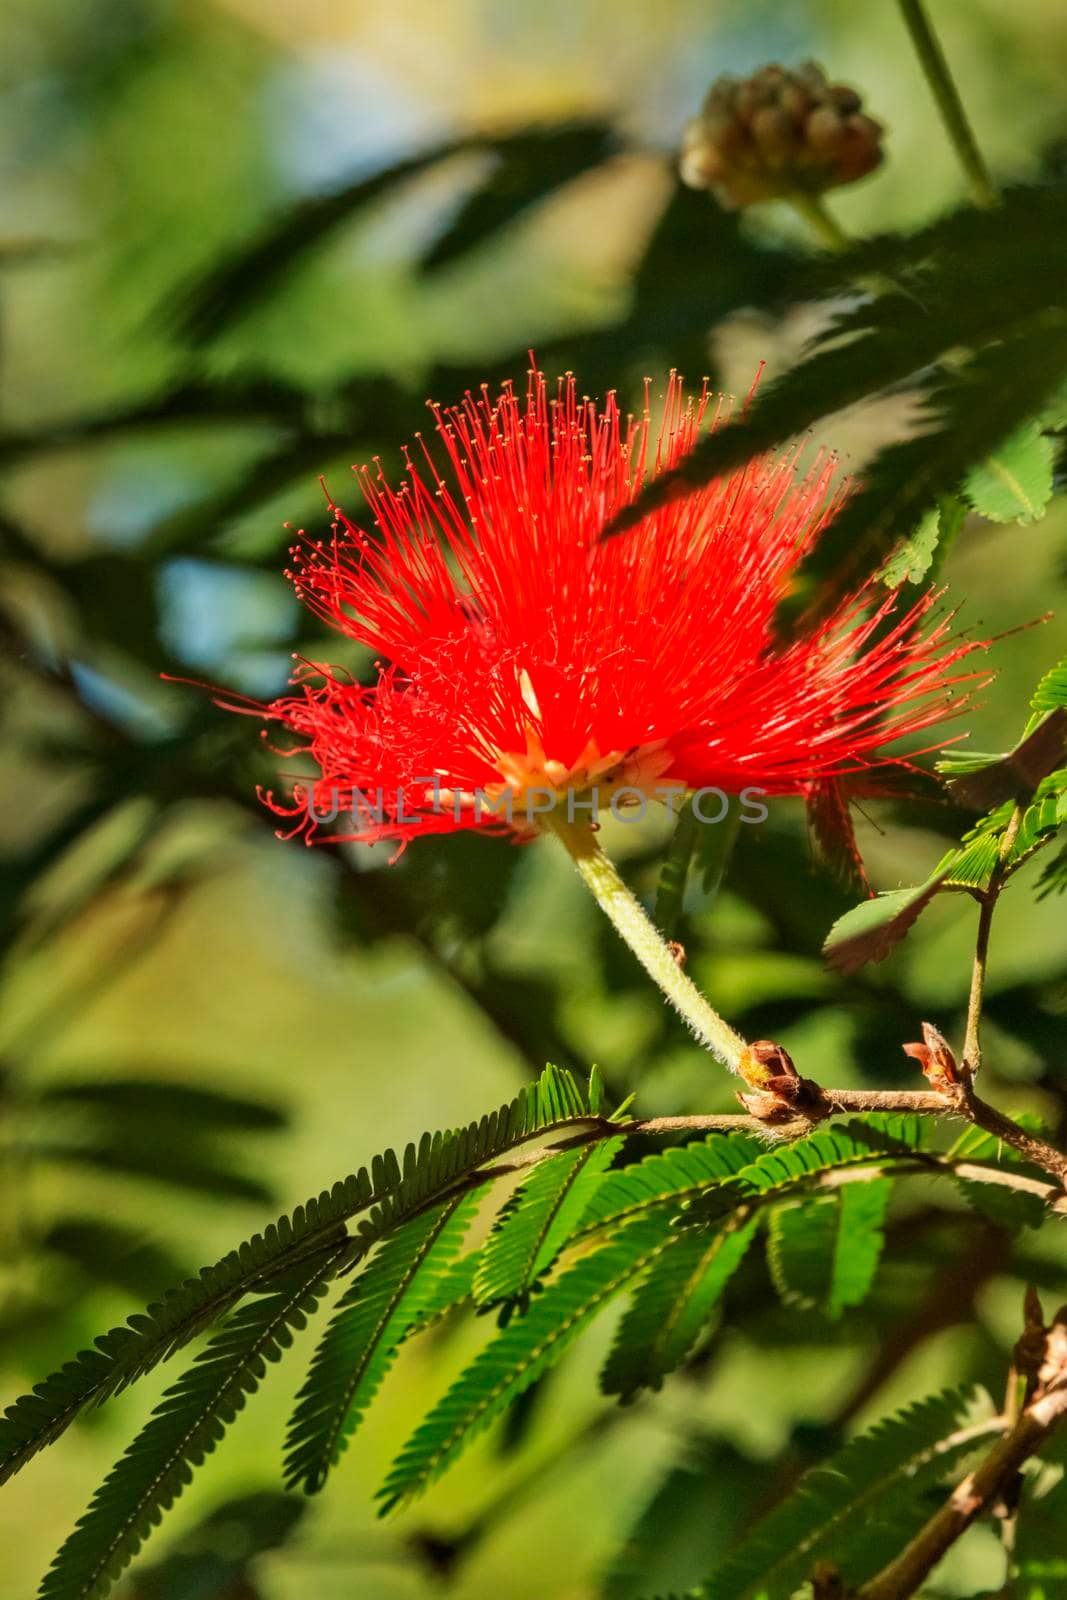 Fantastic red tassel flower also called calliandra tweedii or mexican flame bush , the blooming flower is like a powder puffs  ,    the background is green and out of focus ,